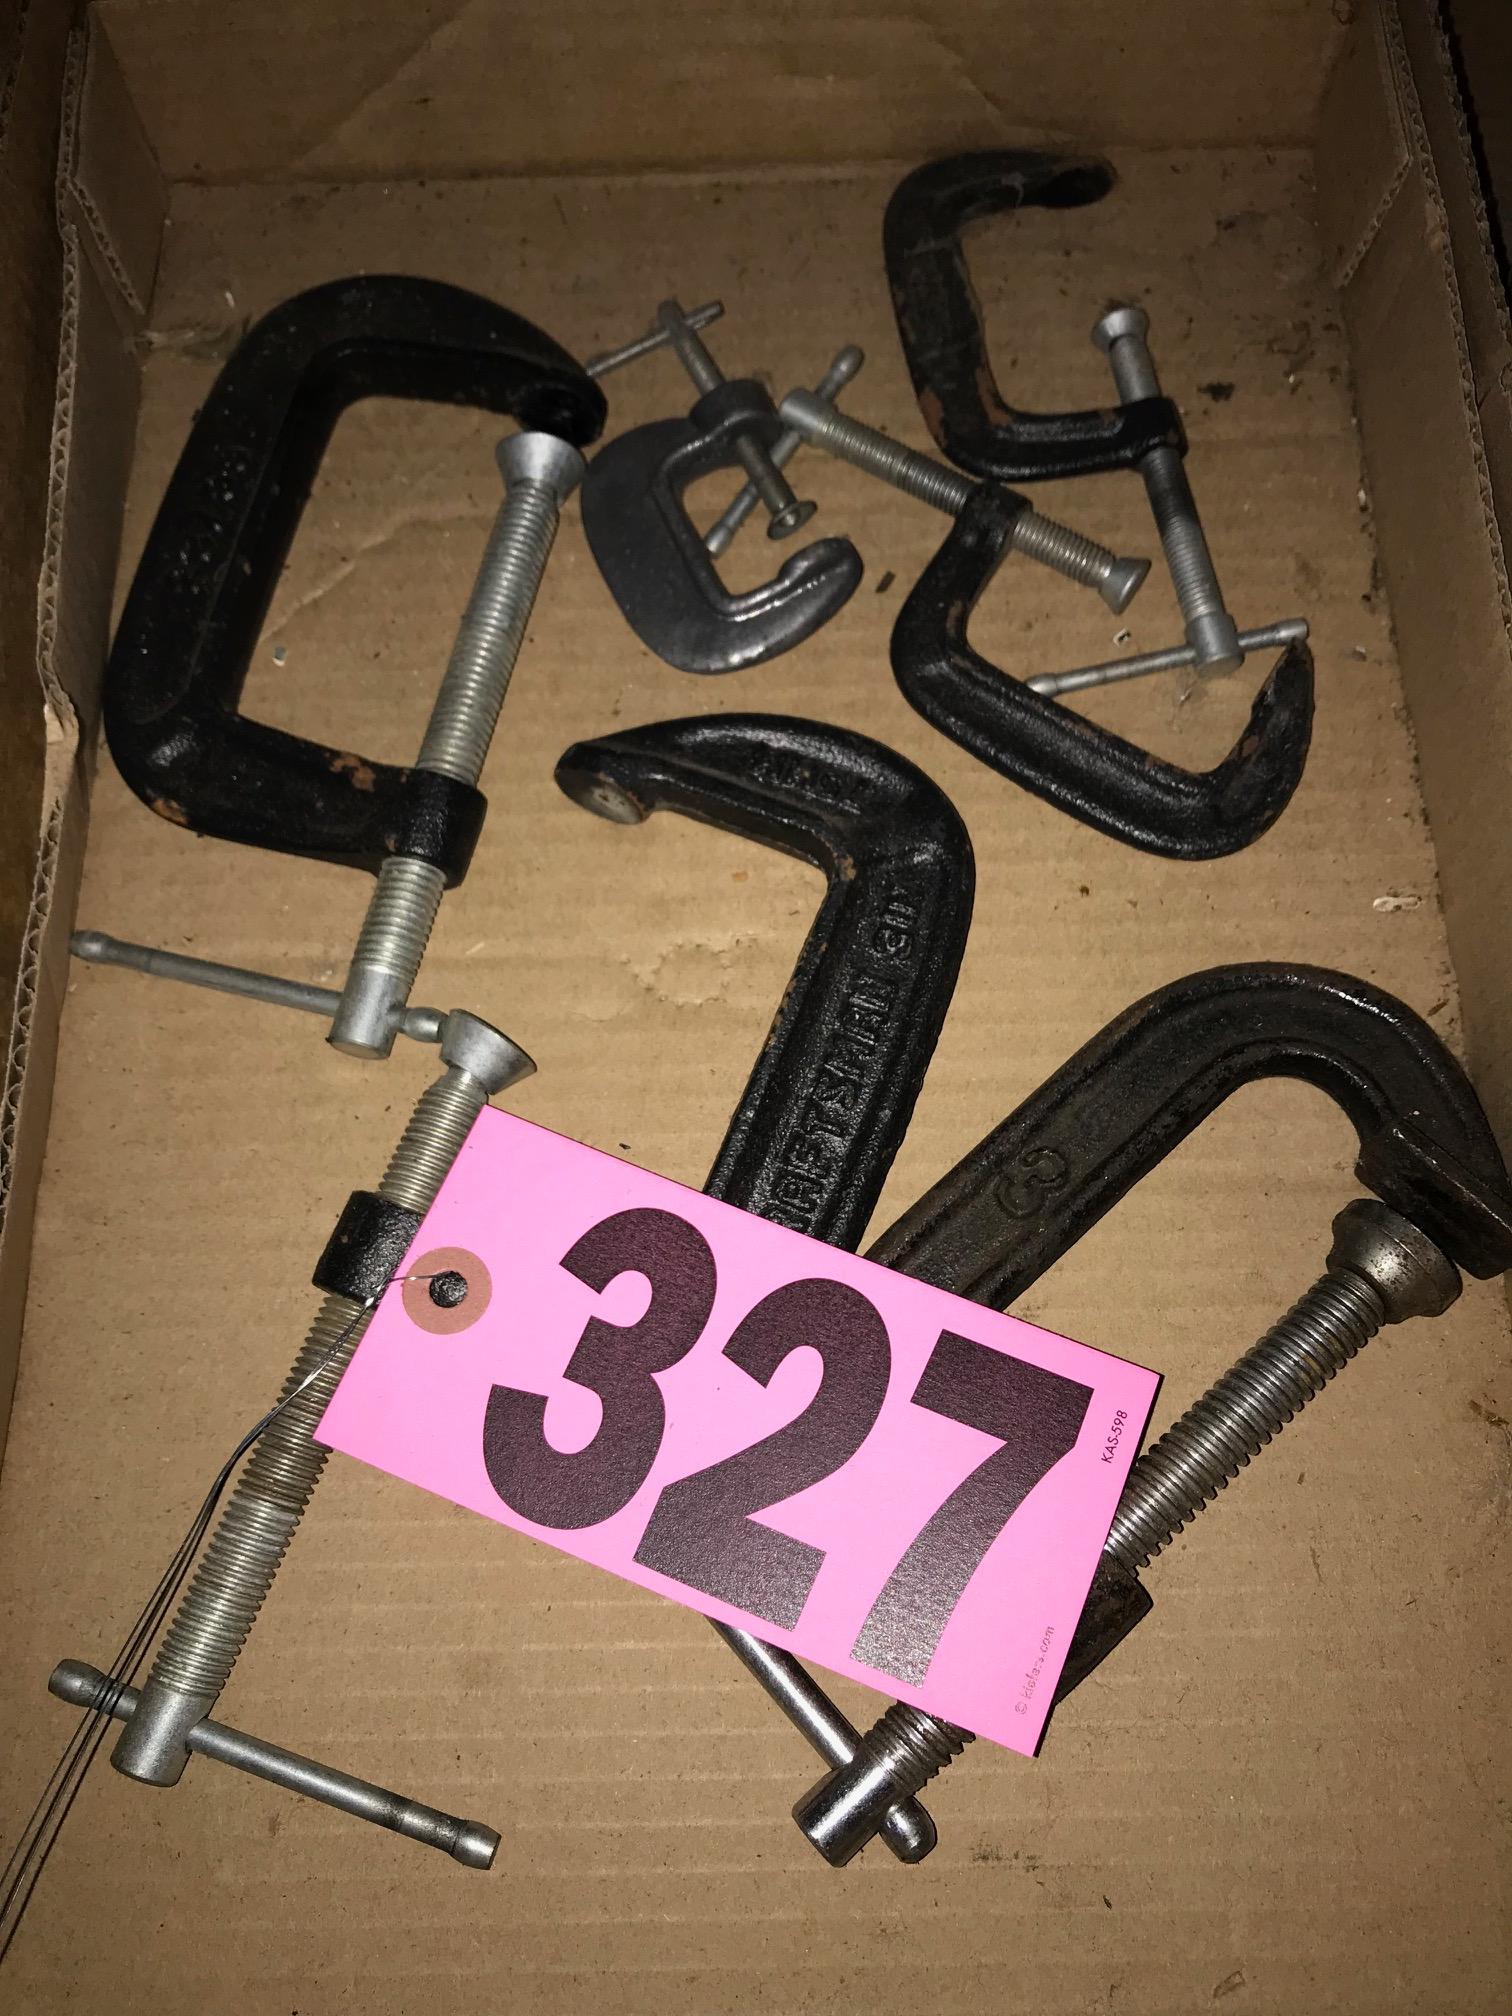 Lot of C-clamps